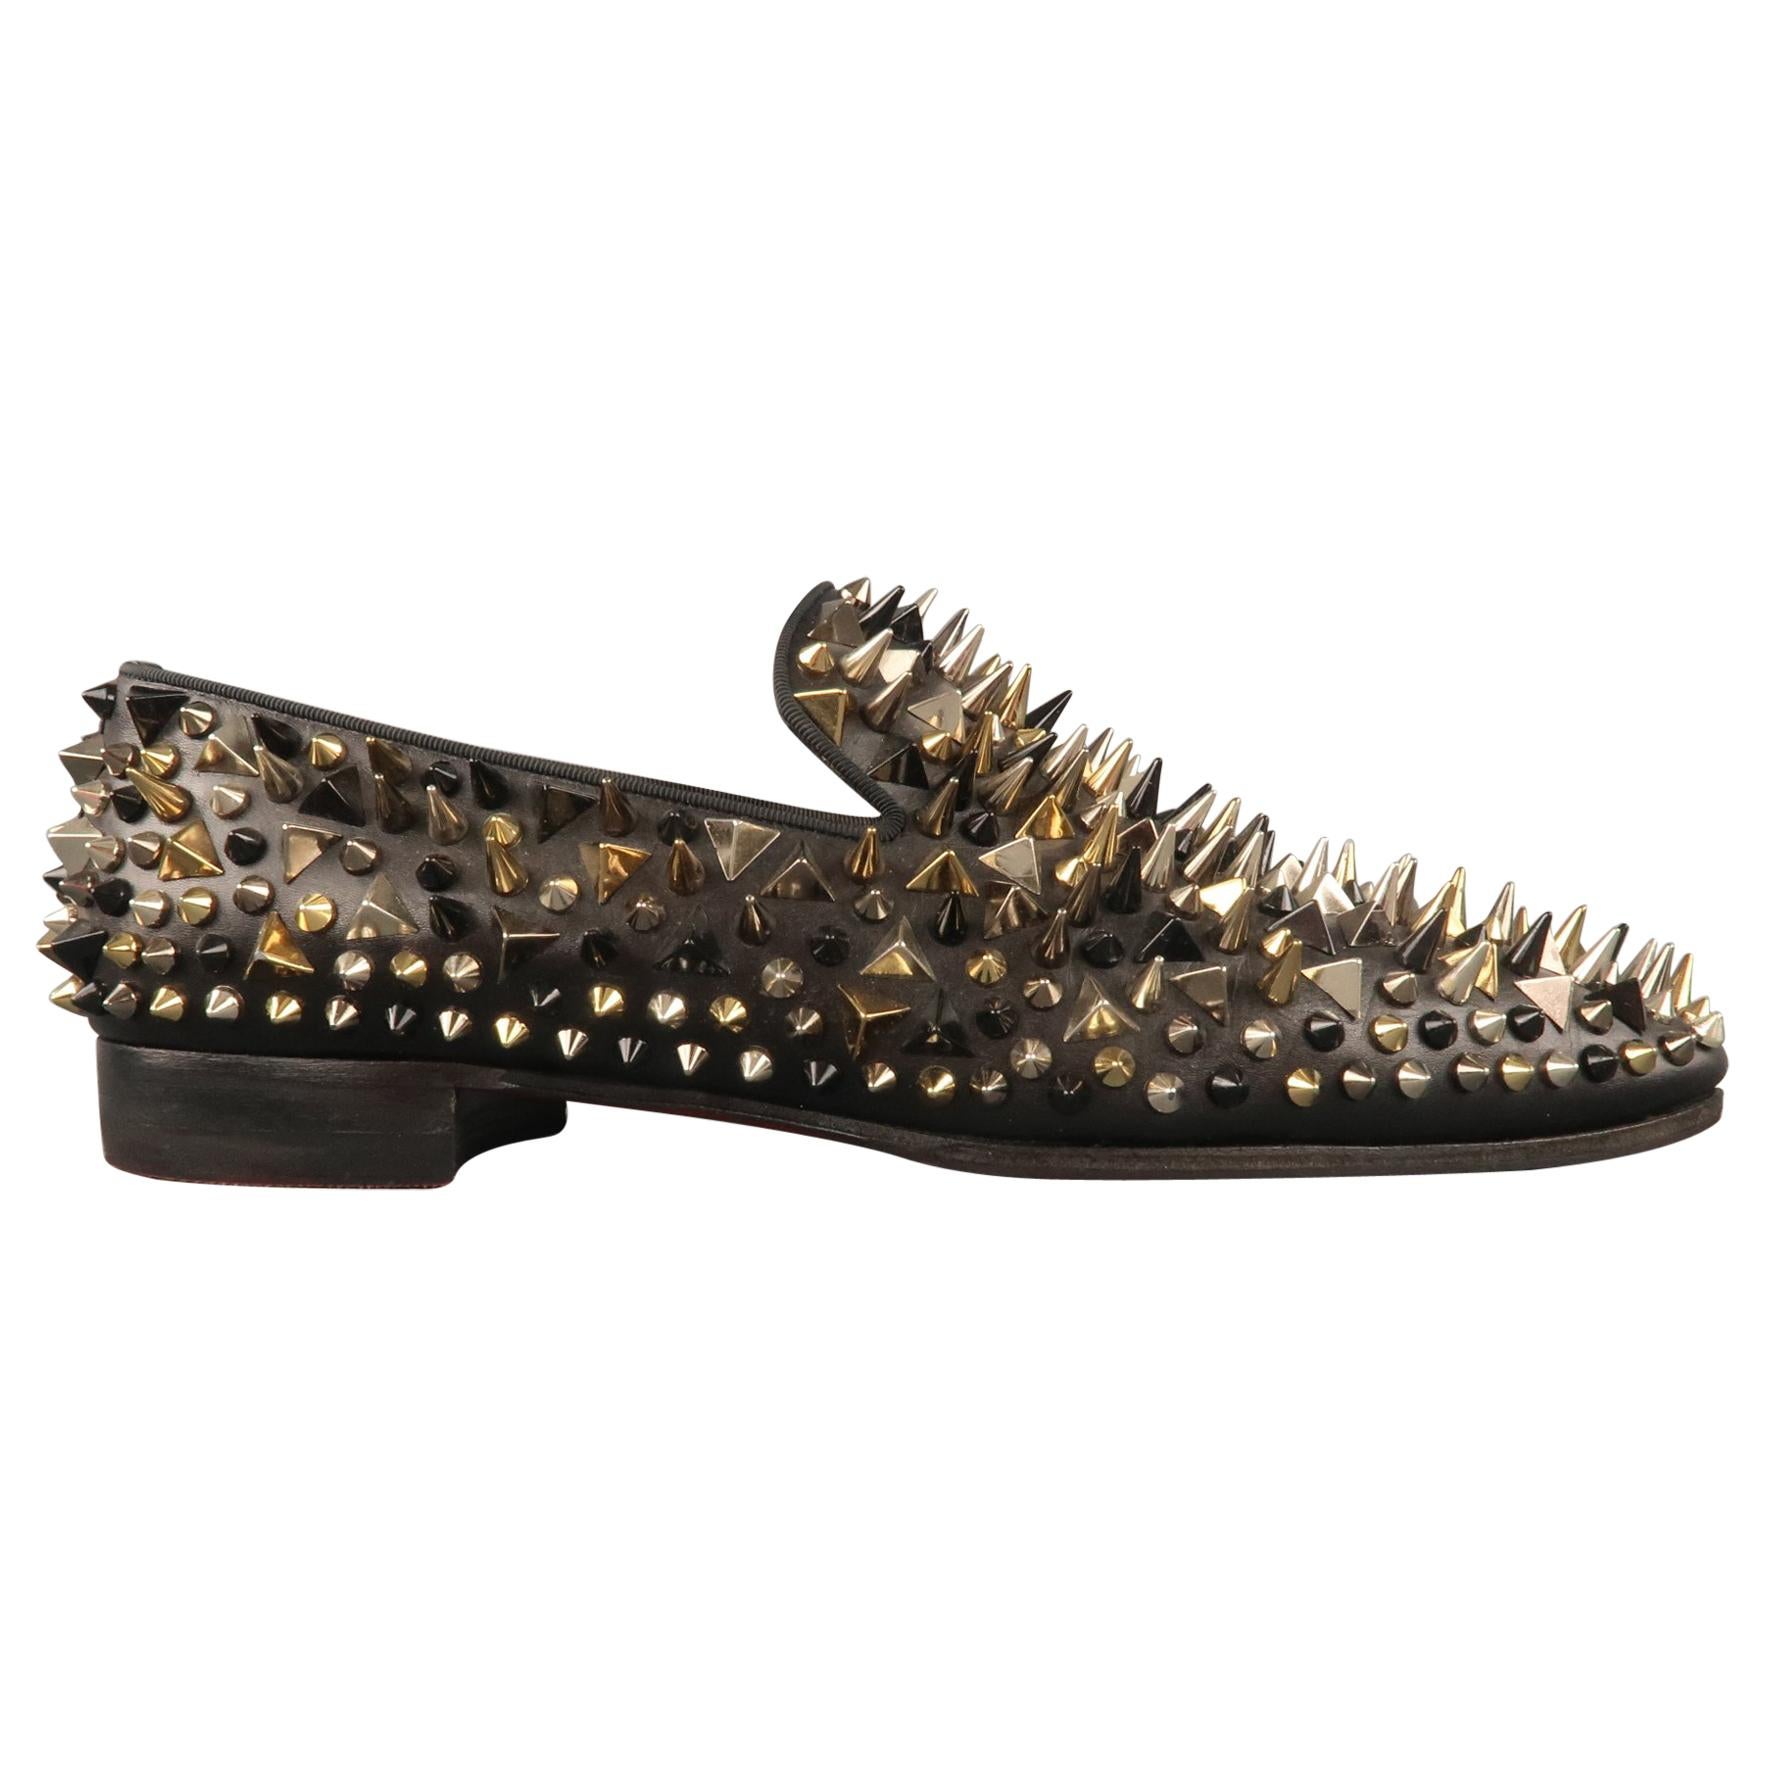 CHRISTIAN LOUBOUTIN Size 9.5 Black Spikes Leather Slip On Loafers